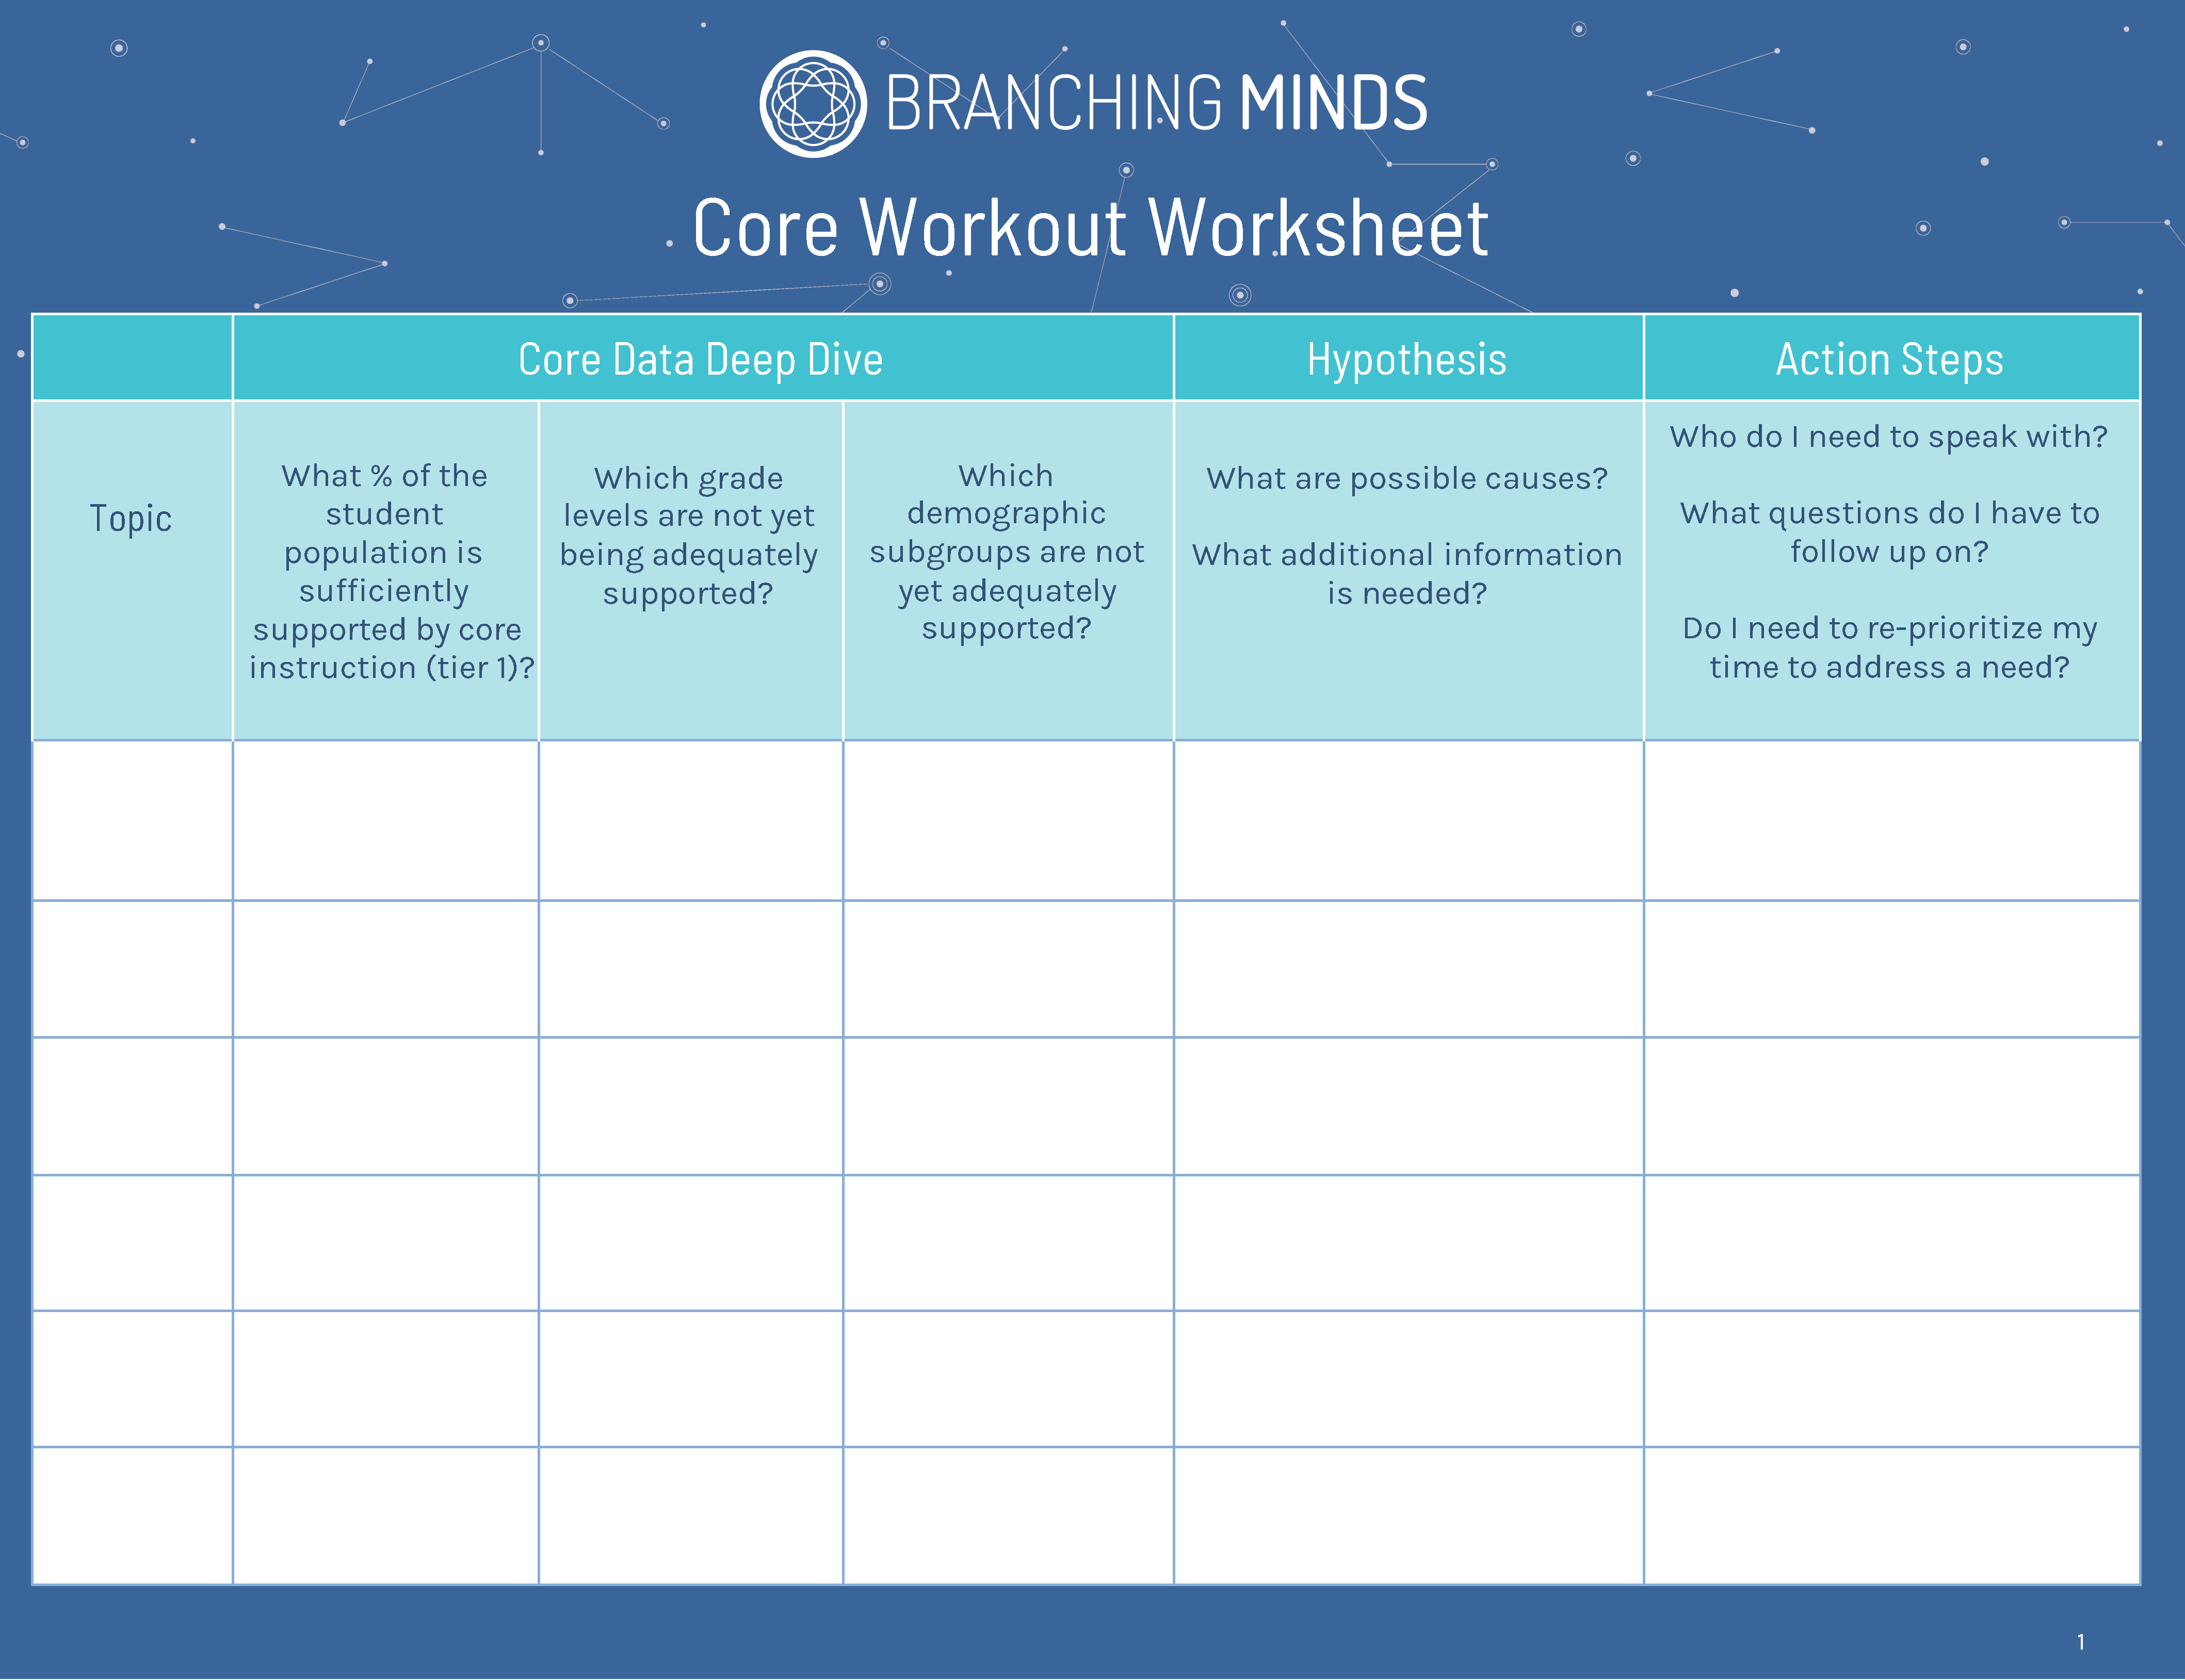 Core Workout Worksheet for MTSS